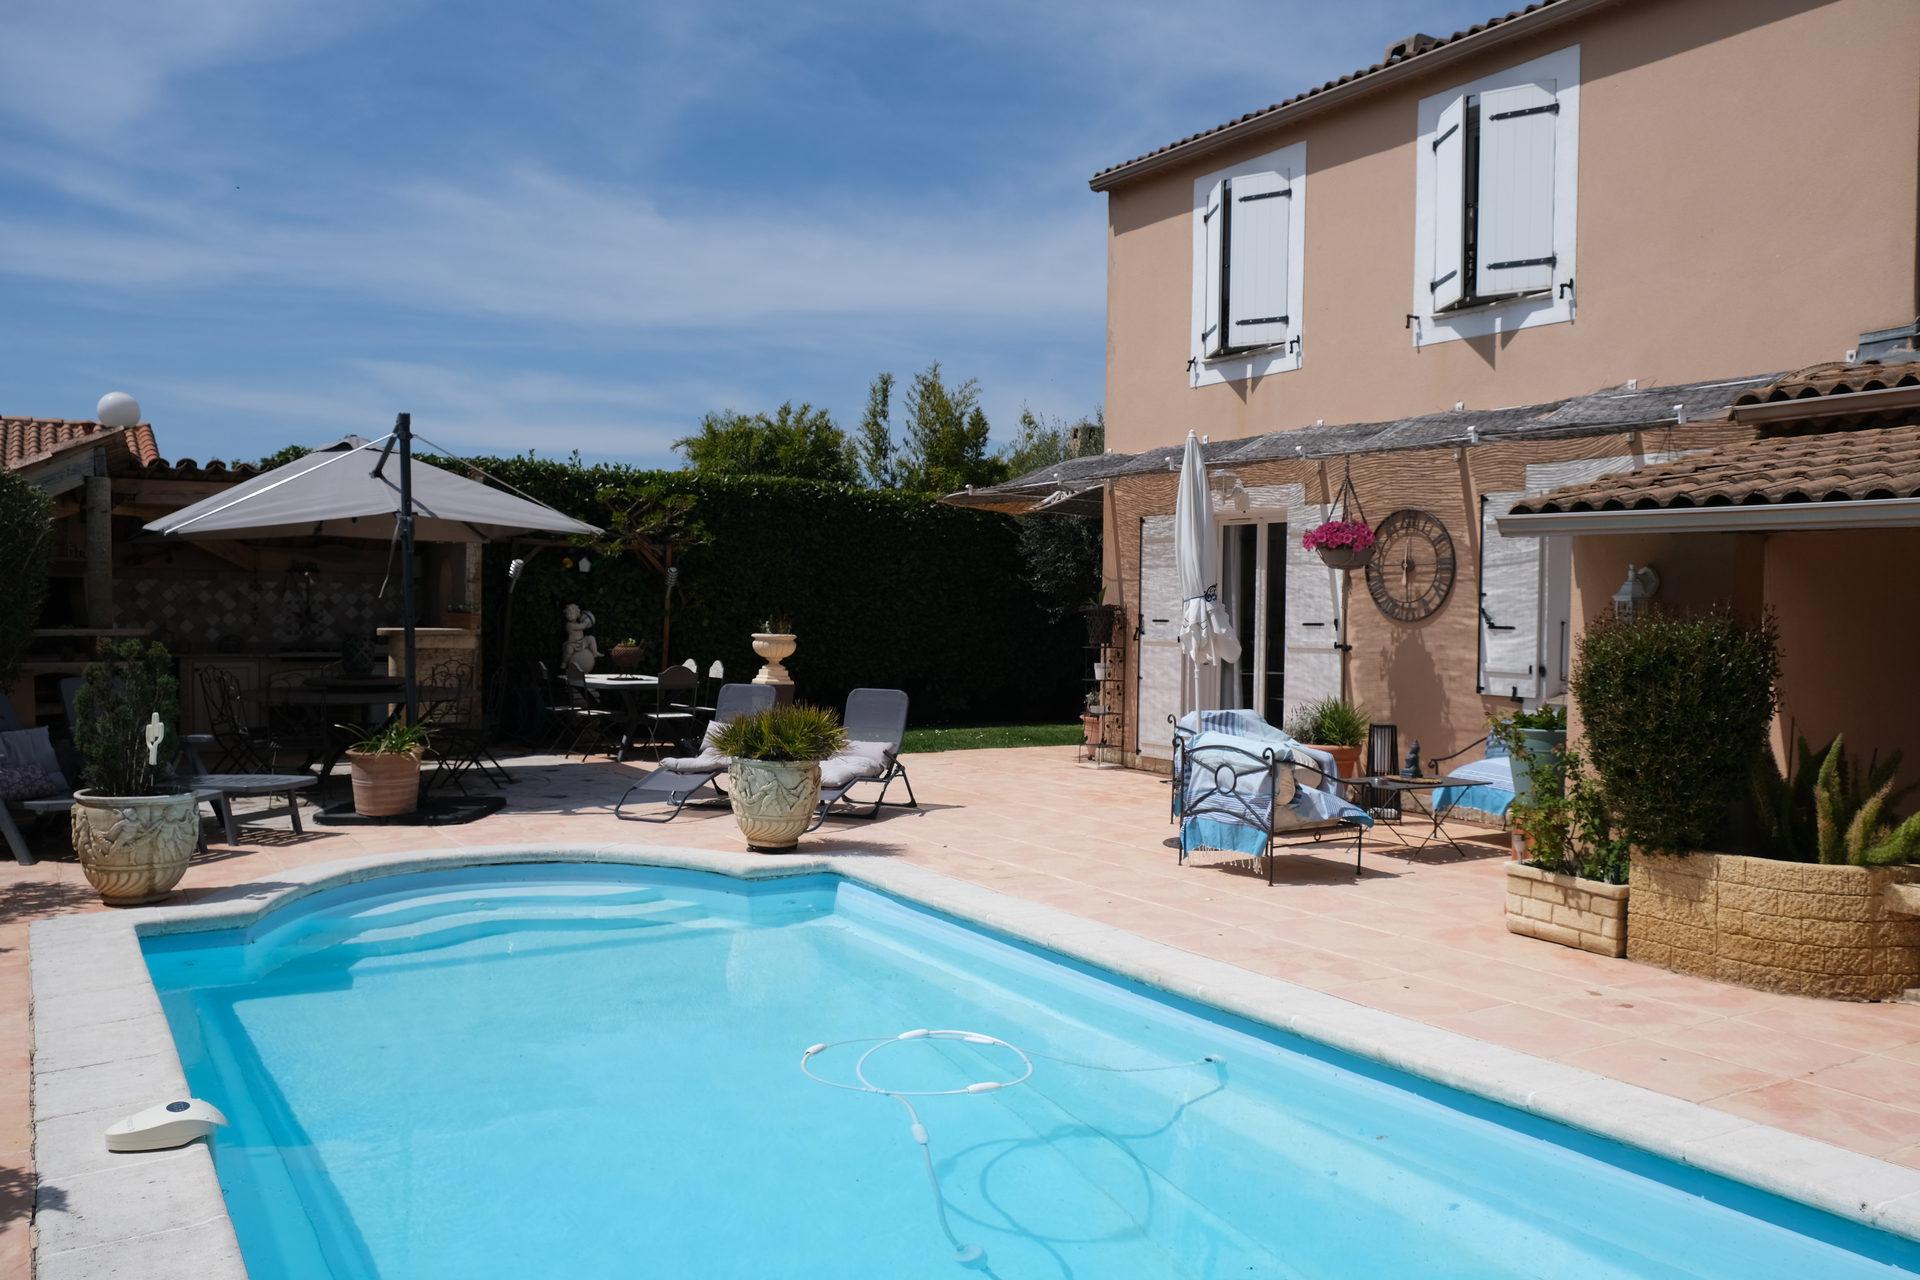 Property Image 1 - pleasant home with private pool and pool house - close to aix en provence, accommodates 4 people.